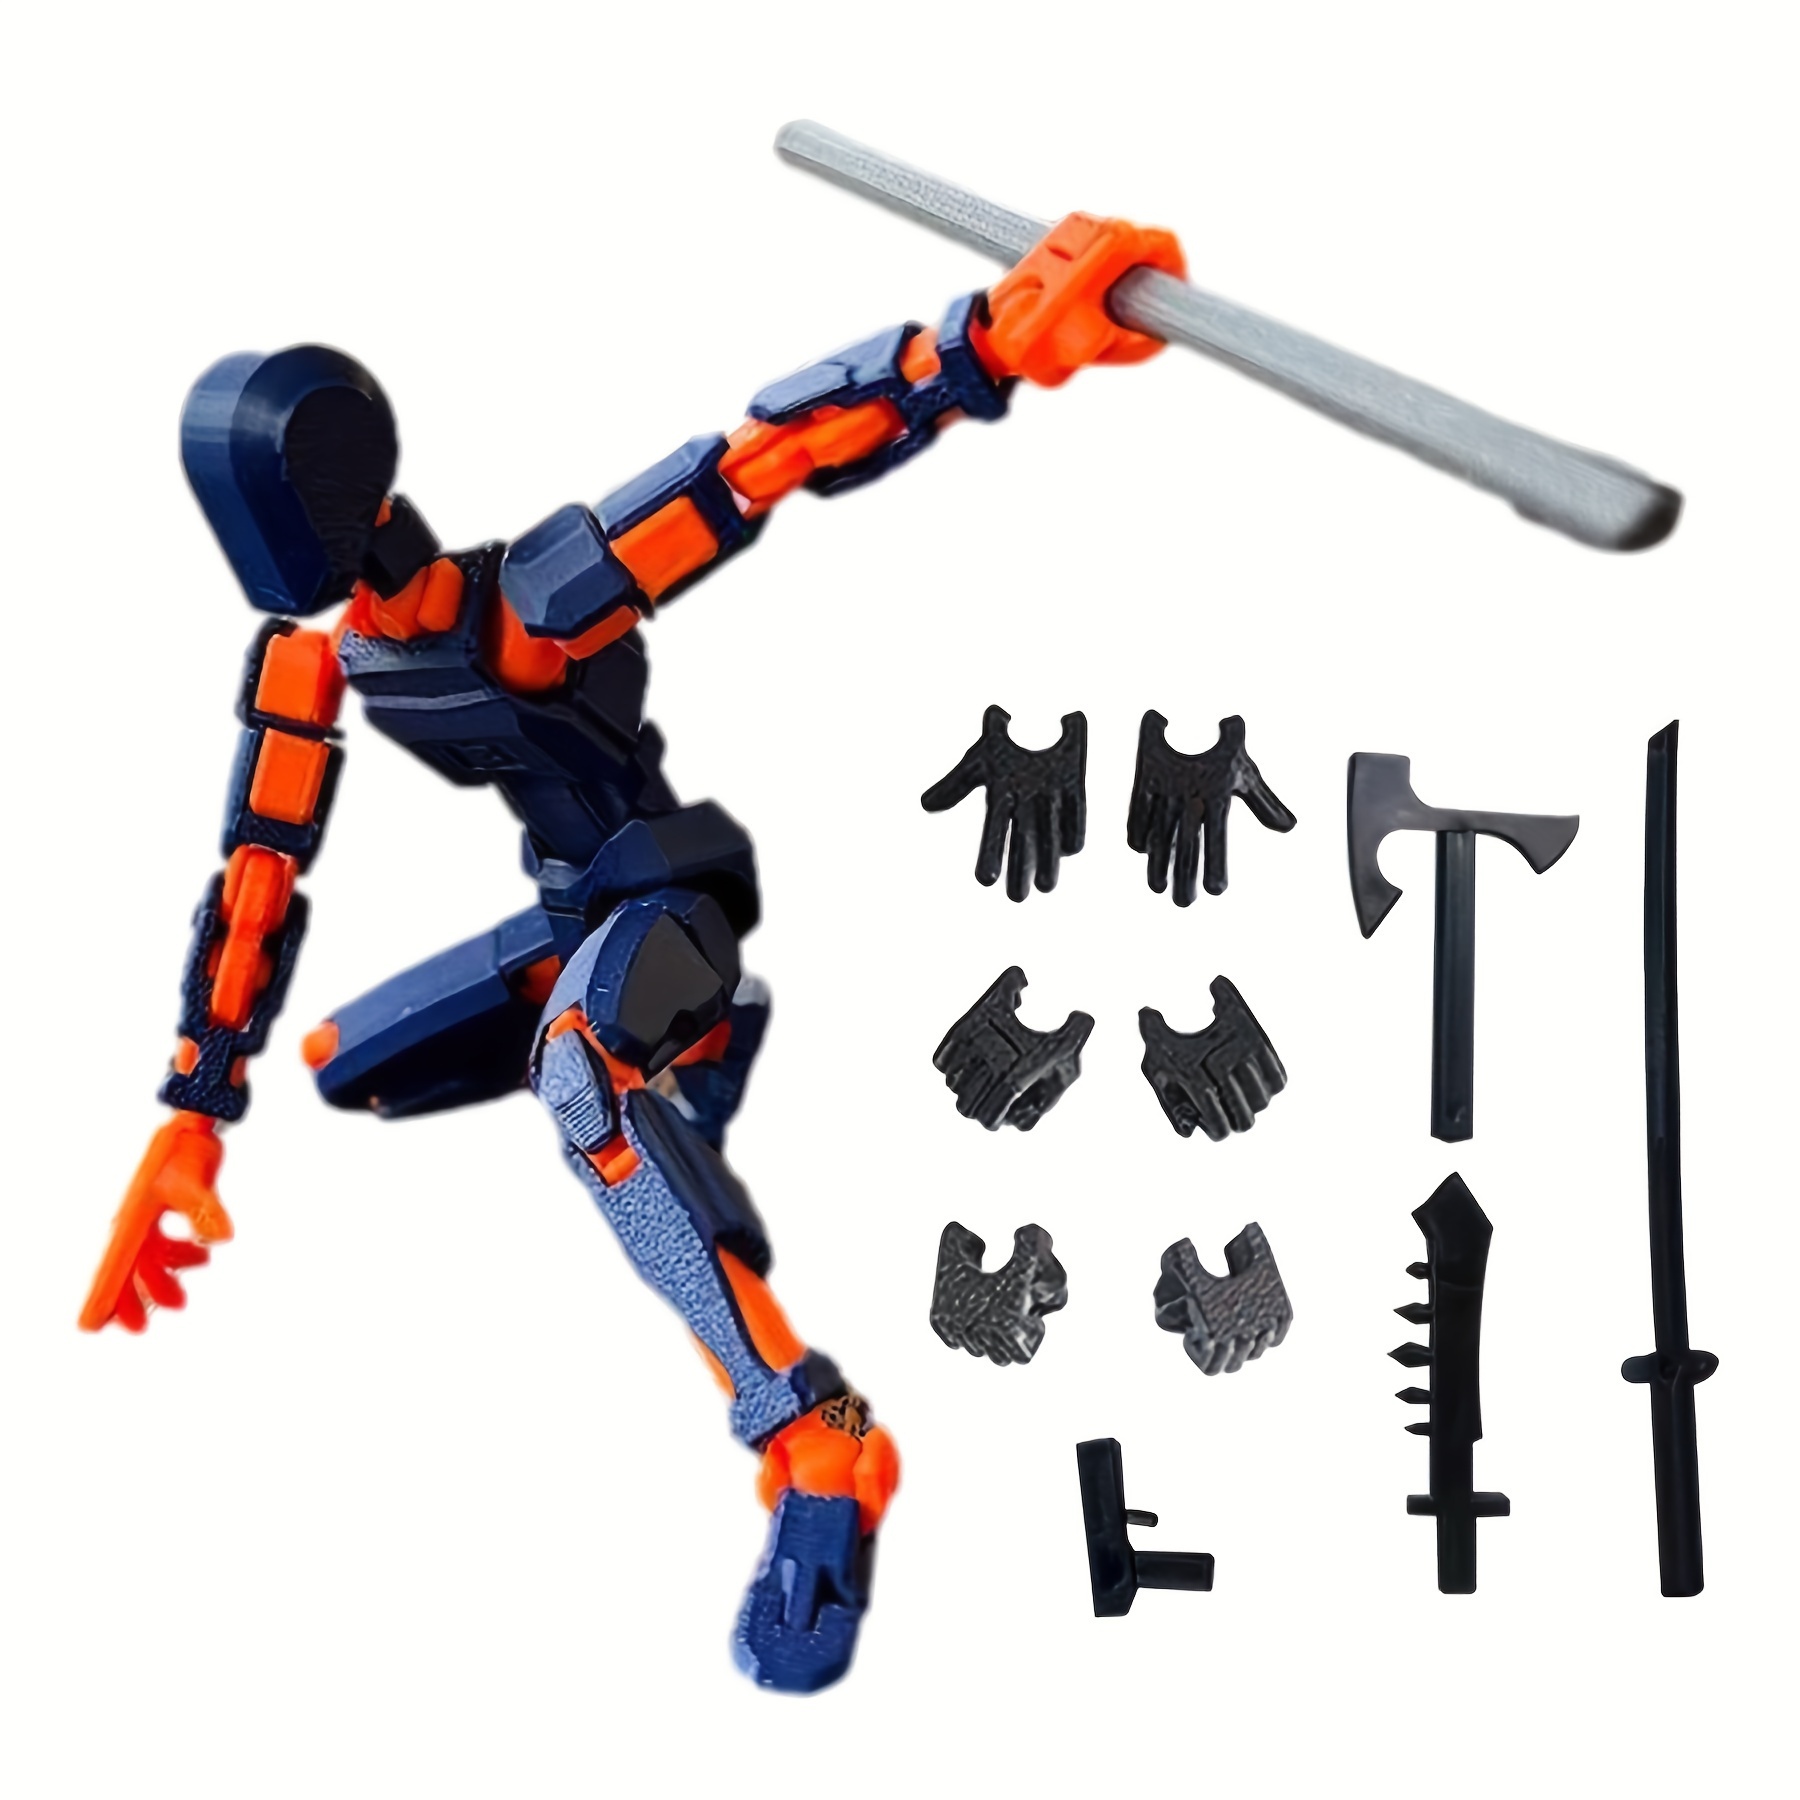 

1pc Action Figure, Assembly Completed Action Figure, 3d Printed Multi-jointed Movable Toy